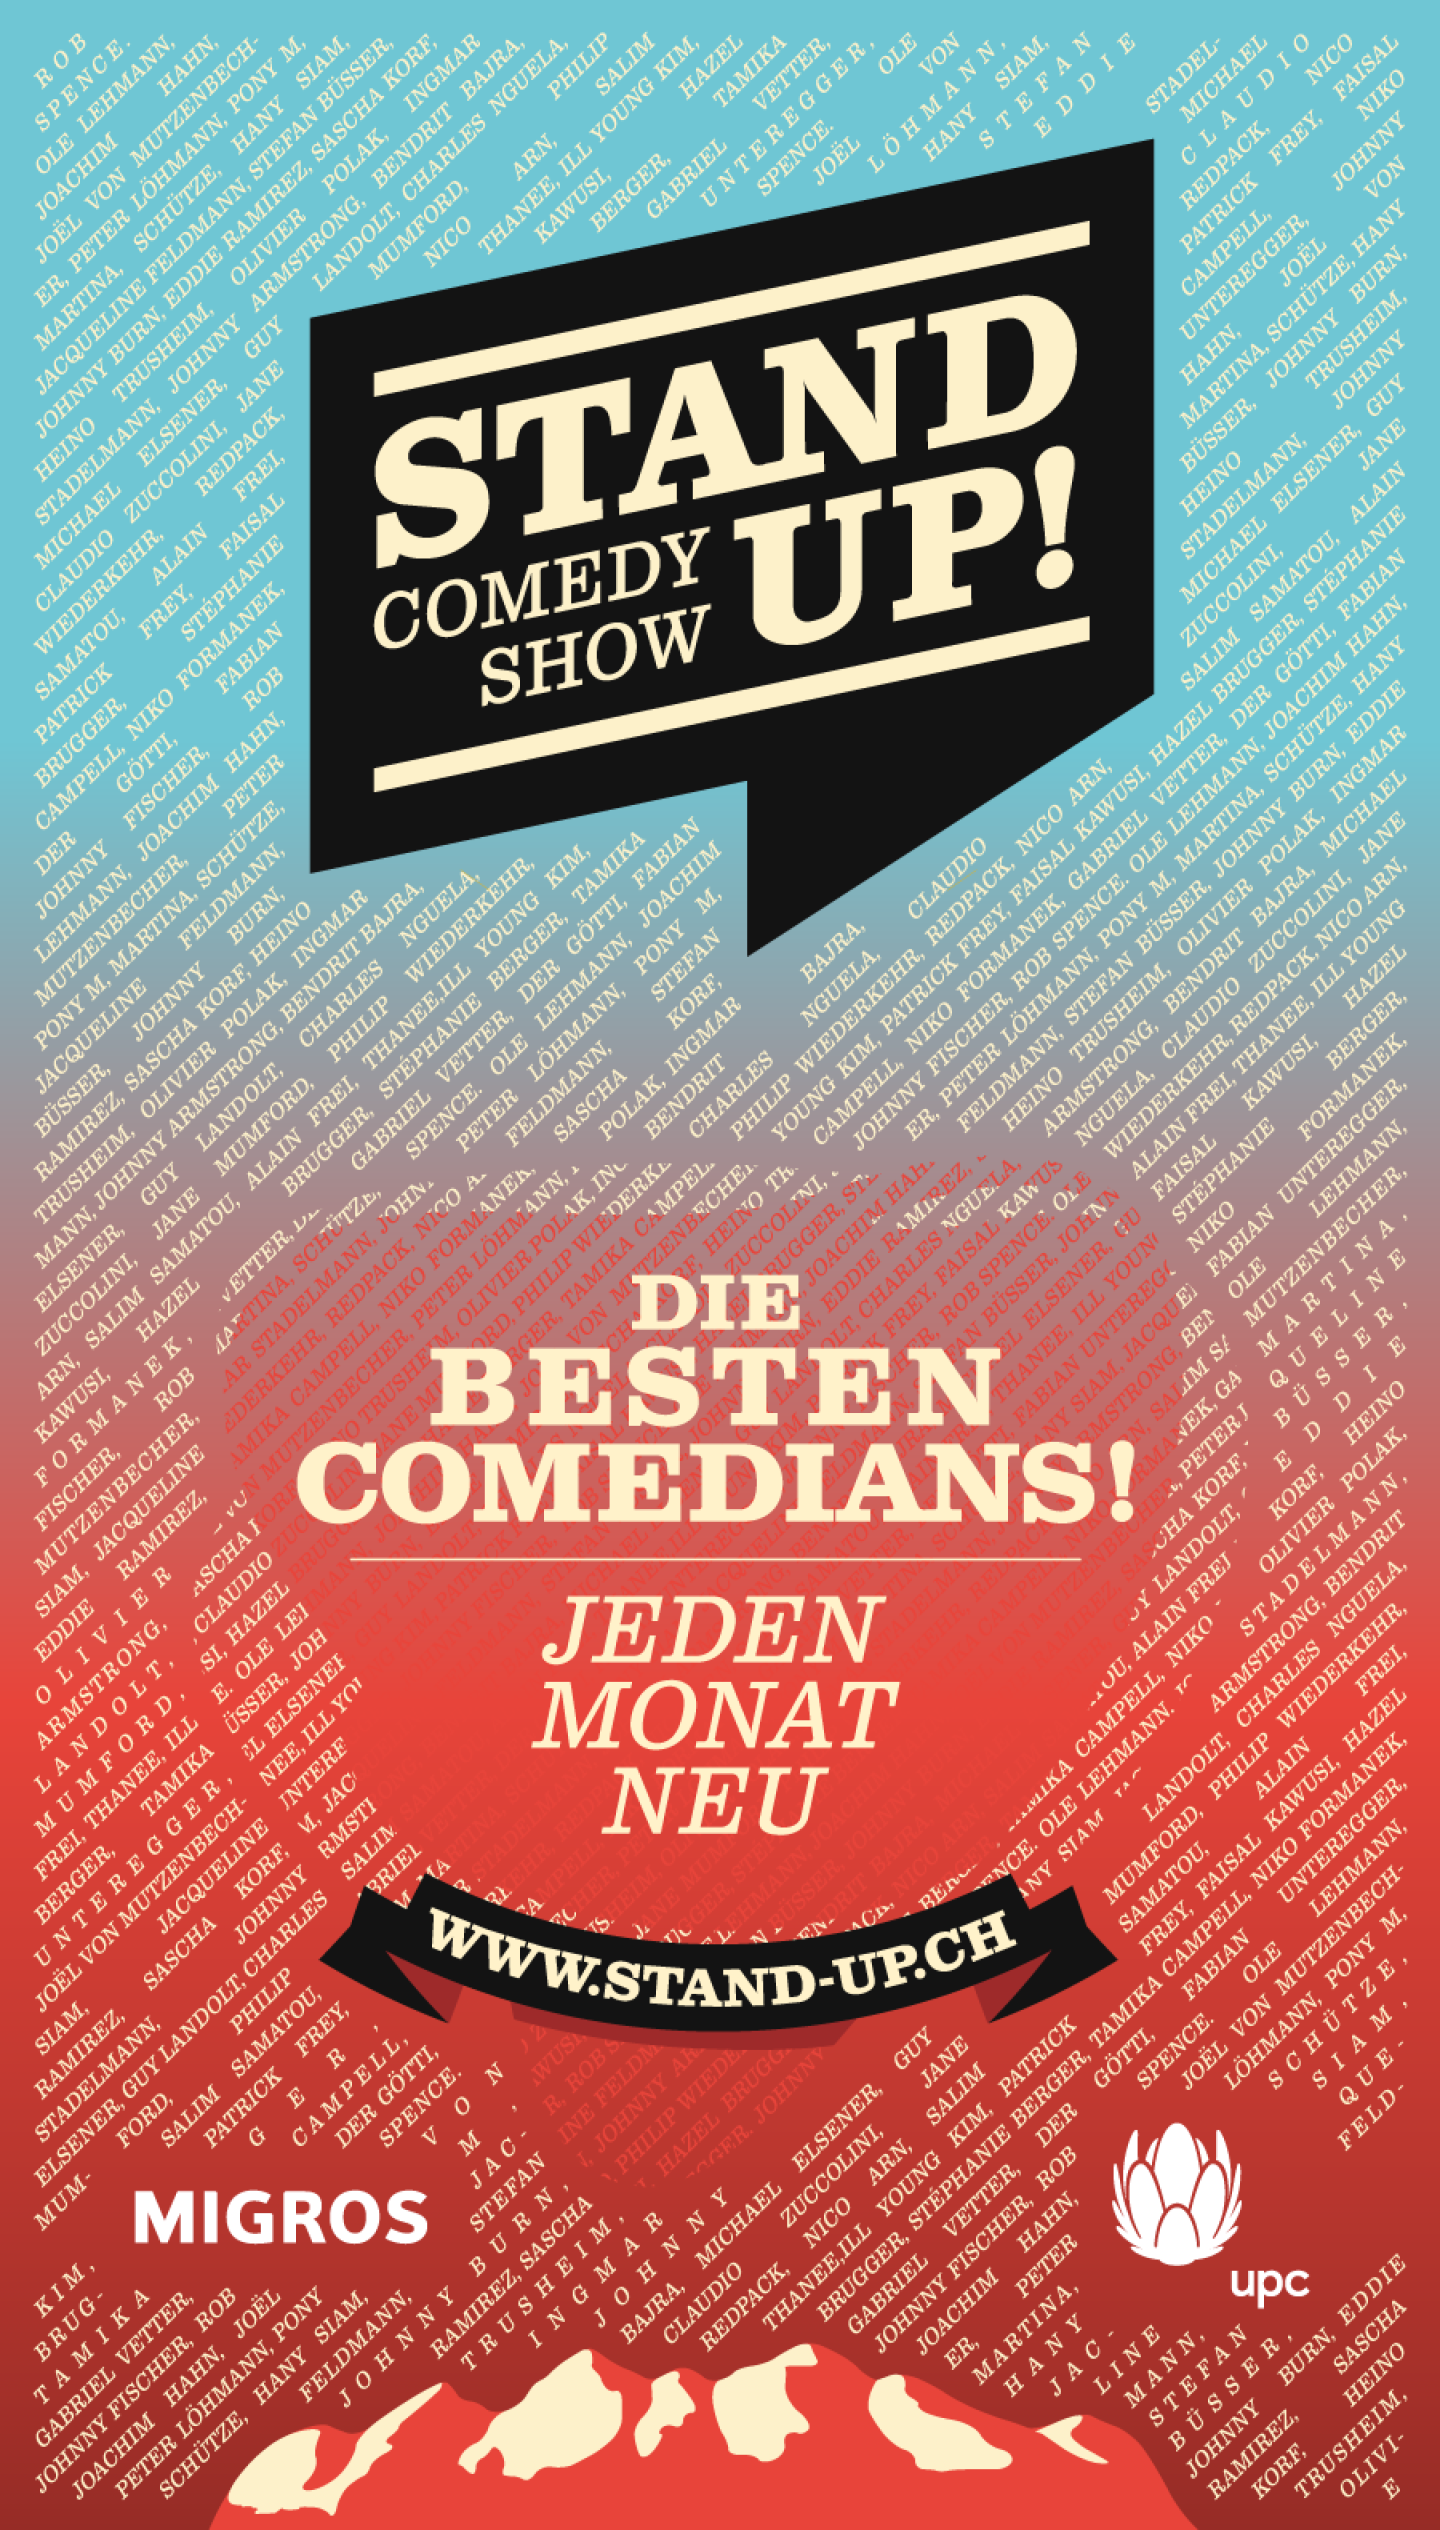 STAND UP! Swiss Comedy Tour